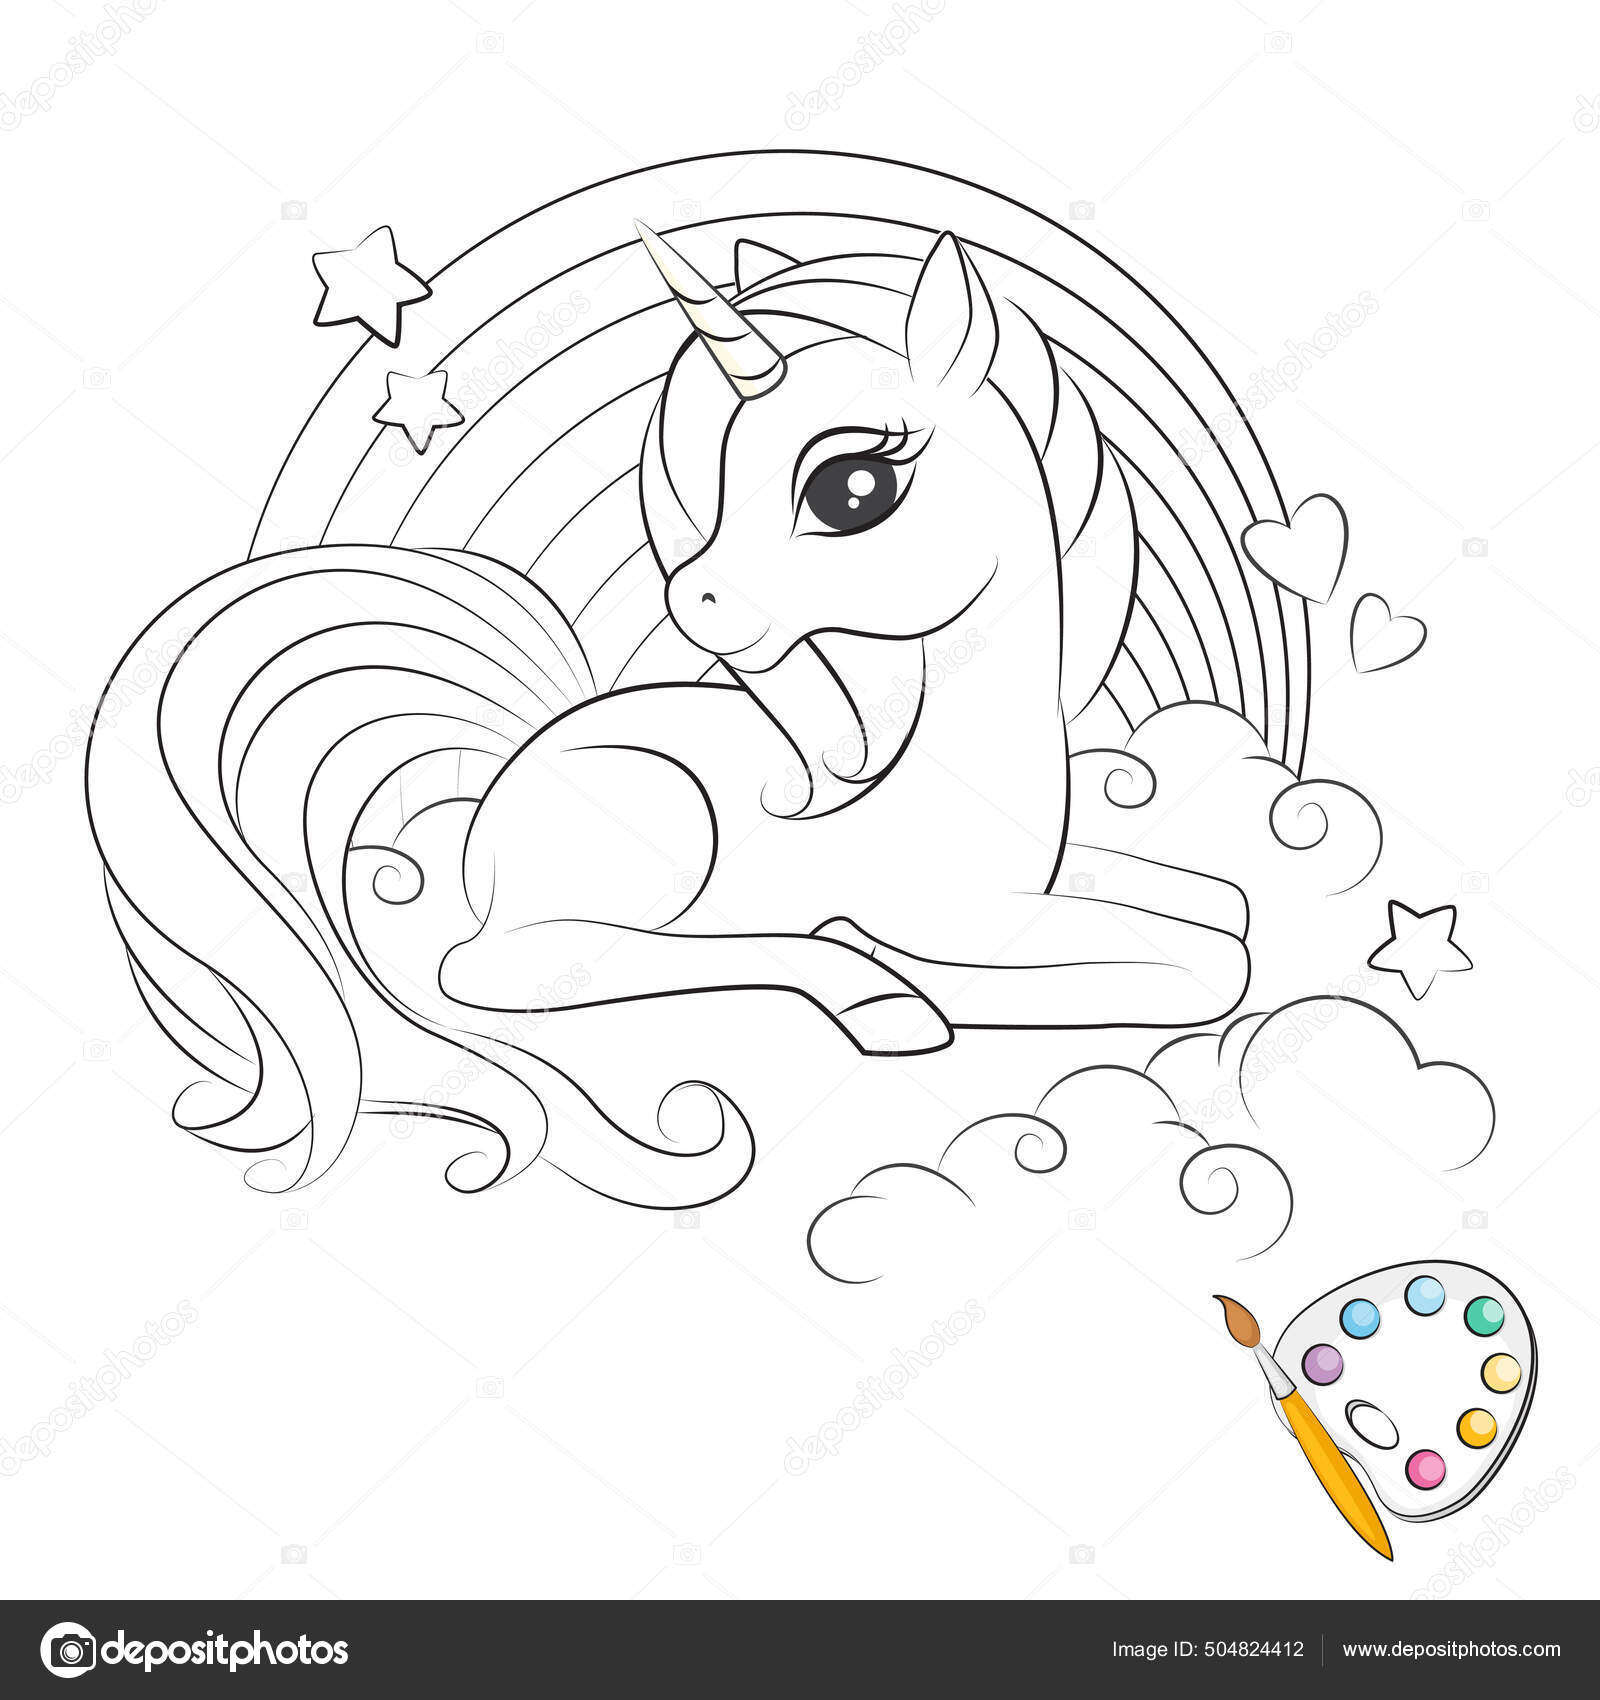 small shirt / cartoon vector and illustration, black and white, hand drawn,  sketch style, isolated on white background. Stock Vector